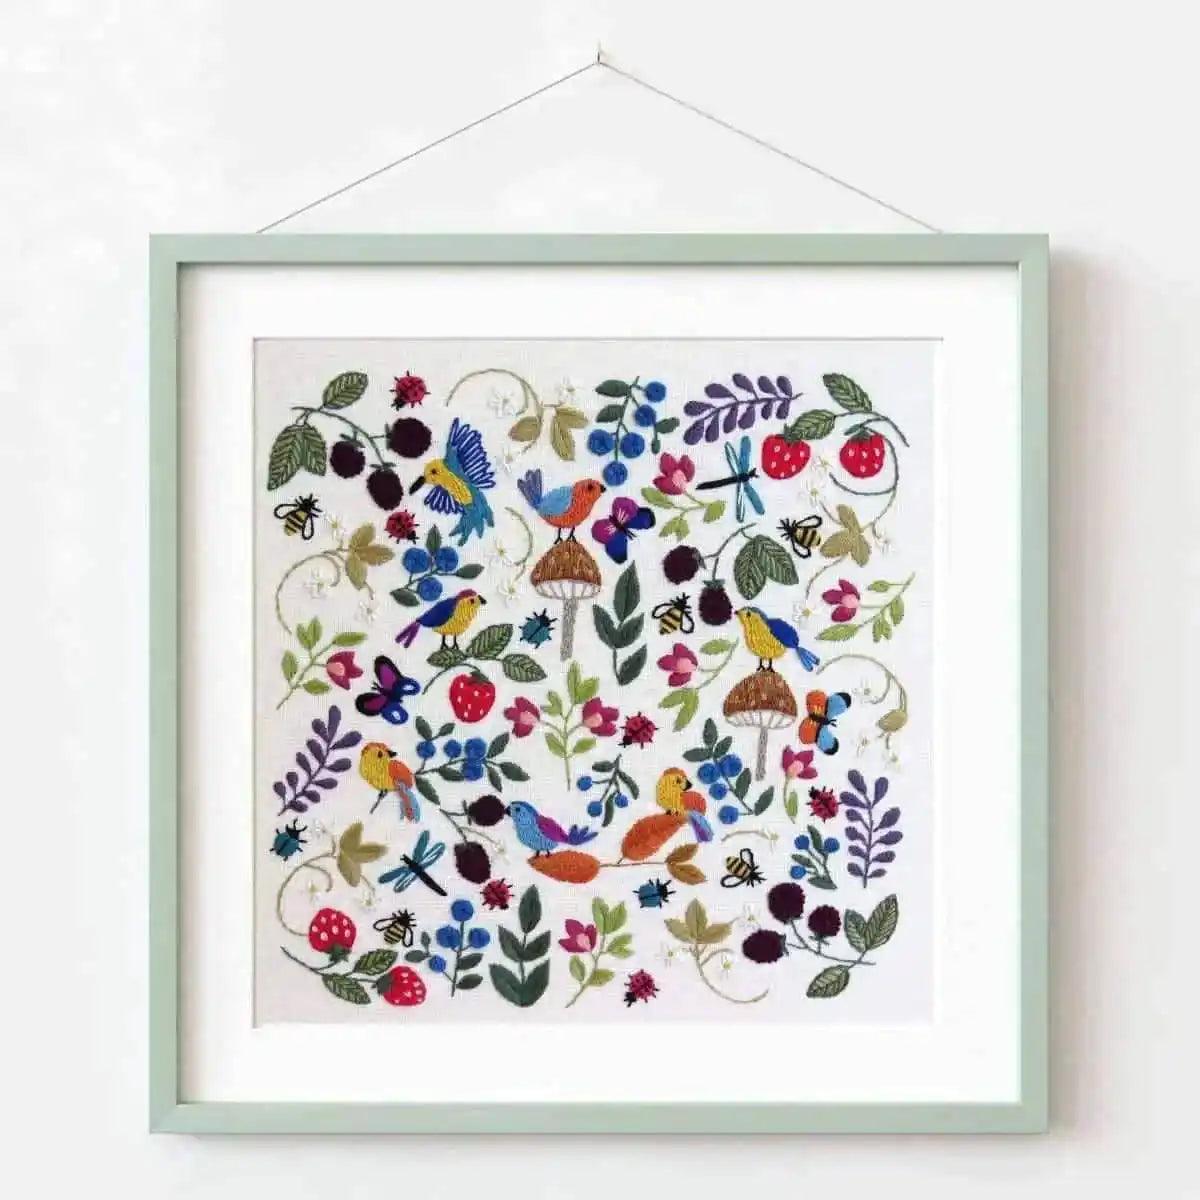 Birds, Bugs and Berries, Hand Embroidery Kit , Embroidery Kit , StitchDoodles , bird embroidery, Embroidery, embroidery hoop, embroidery hoop kit, Embroidery Kit, embroidery kit for adults, embroidery kit fro beginners, embroidery pattern, hand embroidery, hand embroidery fabric, hand embroidery kit, hand embroidery seat frame, hand embroidery thread, modern embroidery kits, nurge embroidery hoop, Printed Pattern, wildlife embroidery , StitchDoodles , shop.stitchdoodles.com